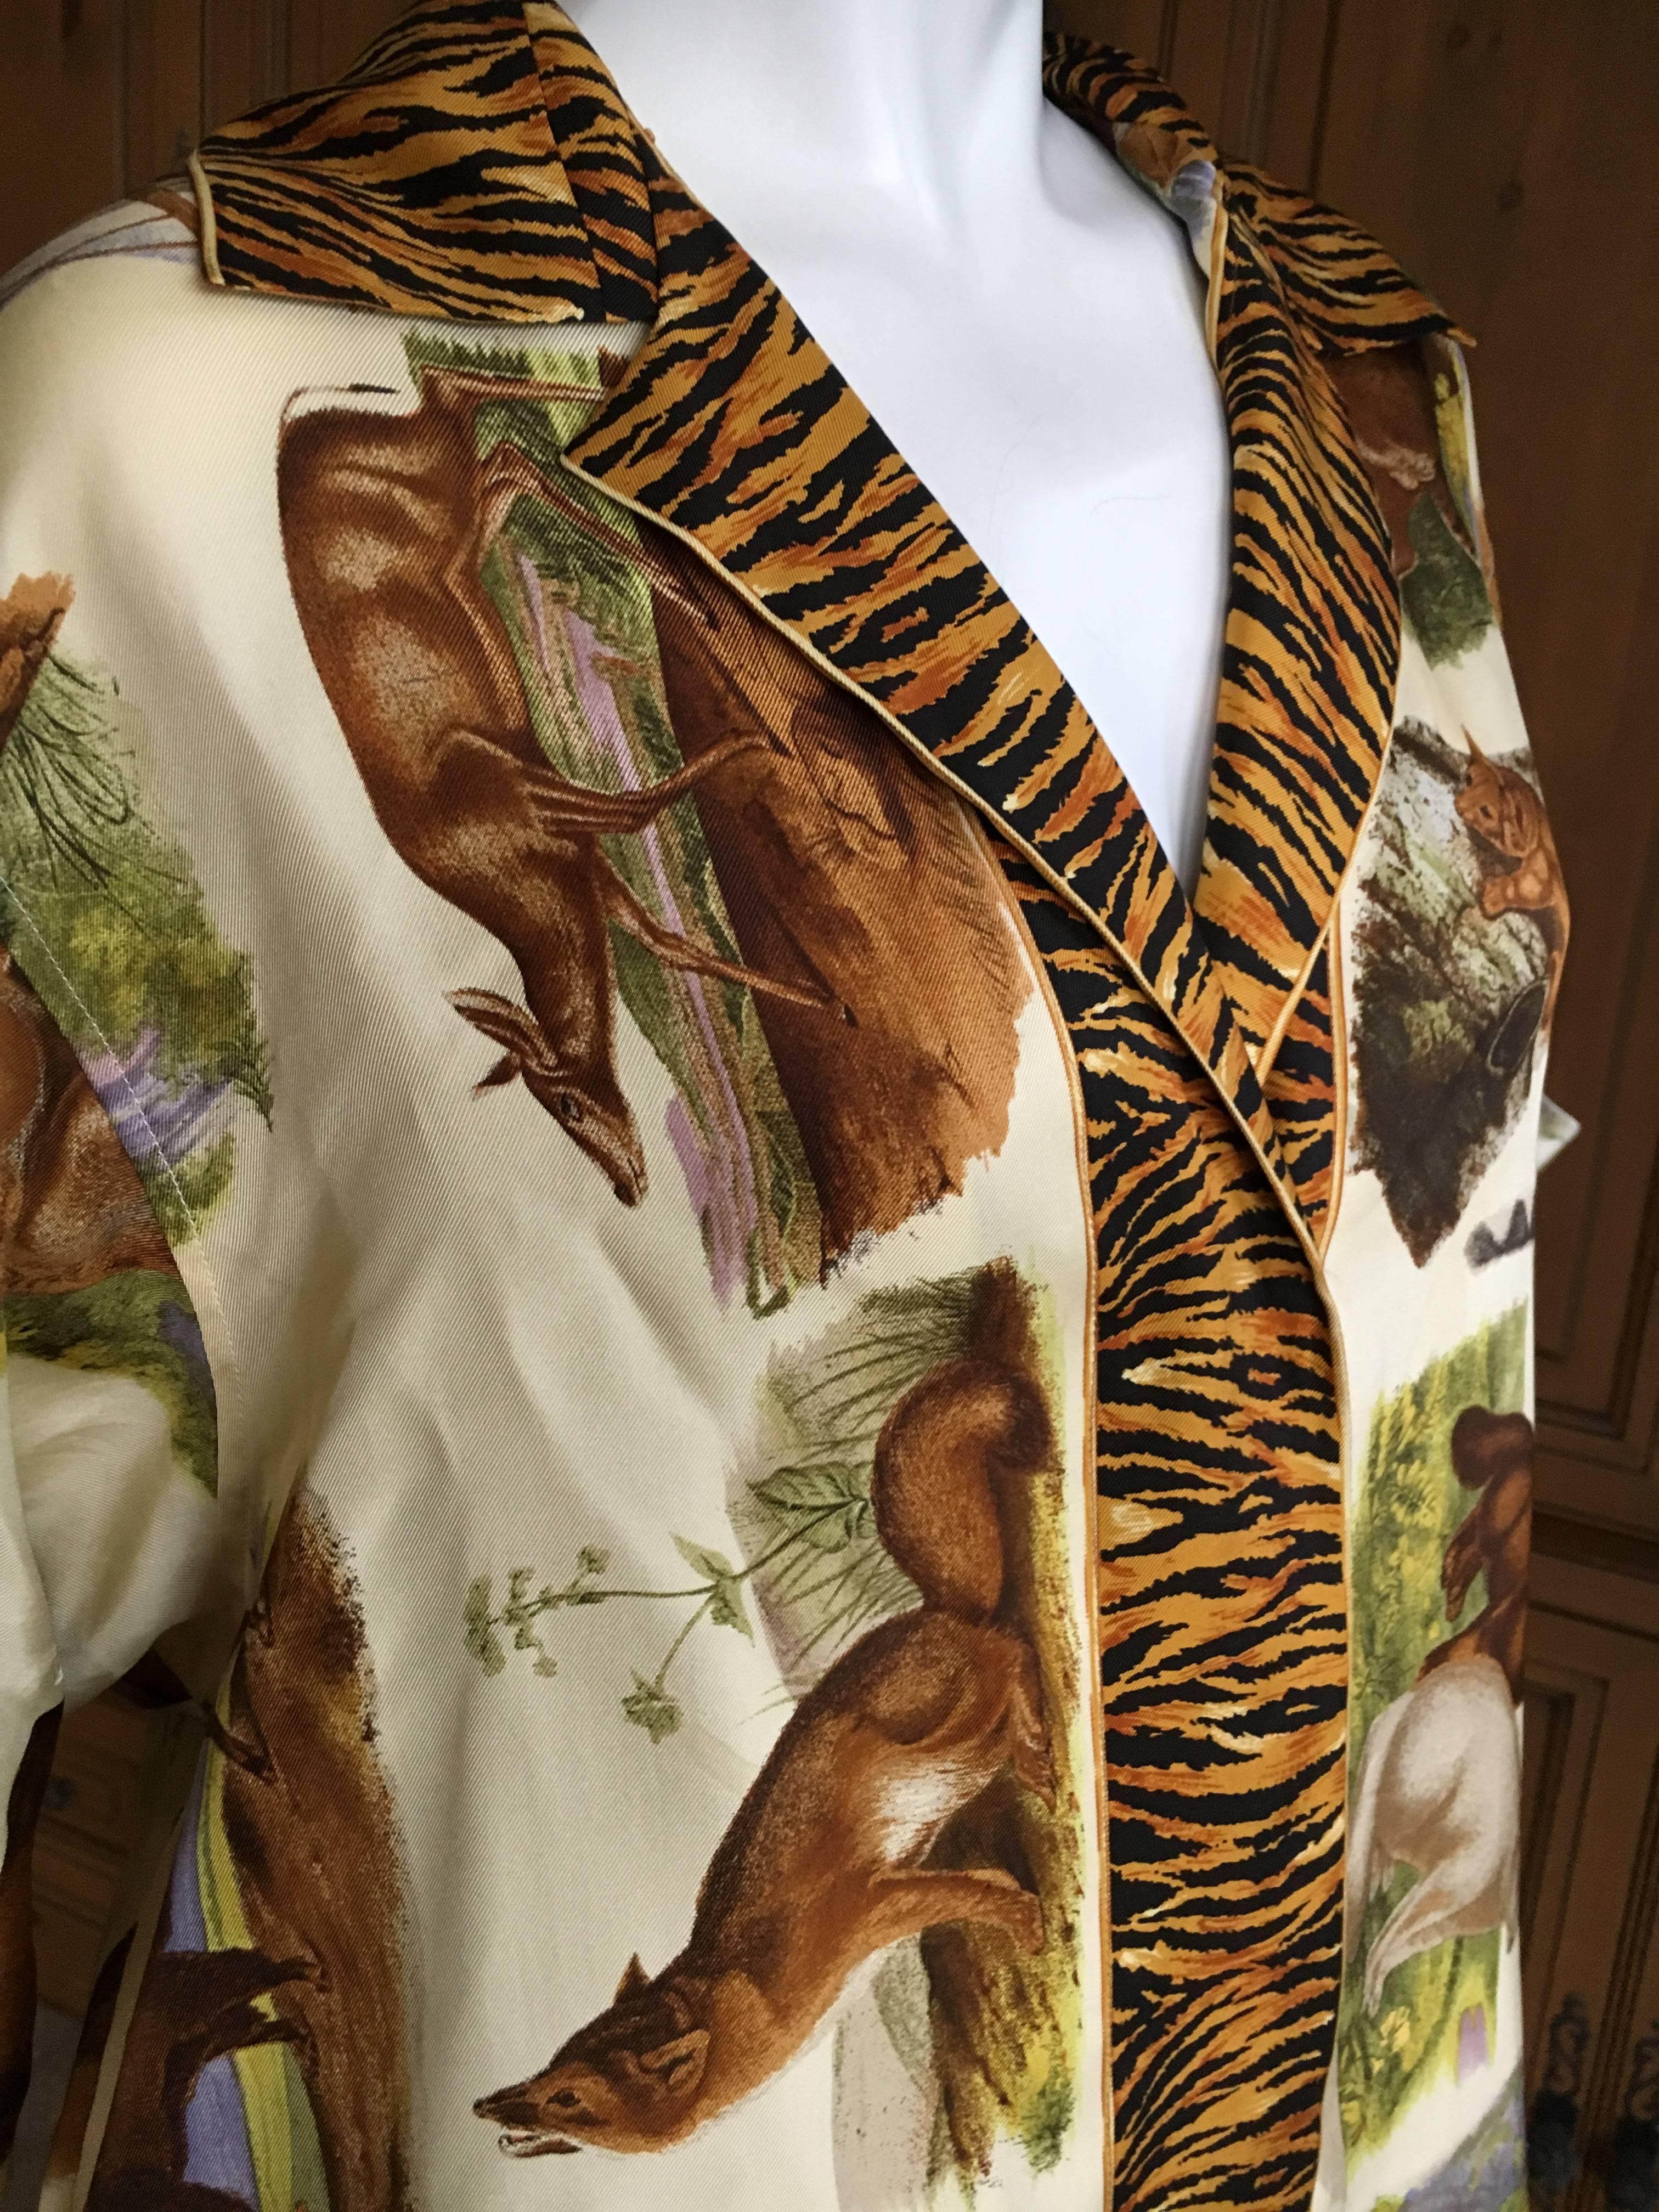 Gucci Animal Print Scarf Silk Vintage Blouse with GG Cufflinks.
 This is a sensational piece, in mint condition.
It's a great size and could be worn by a man or lady.
 Size 44 
Bust 44" 
Waist 44"
 Length 32"
Sleeve 23"
